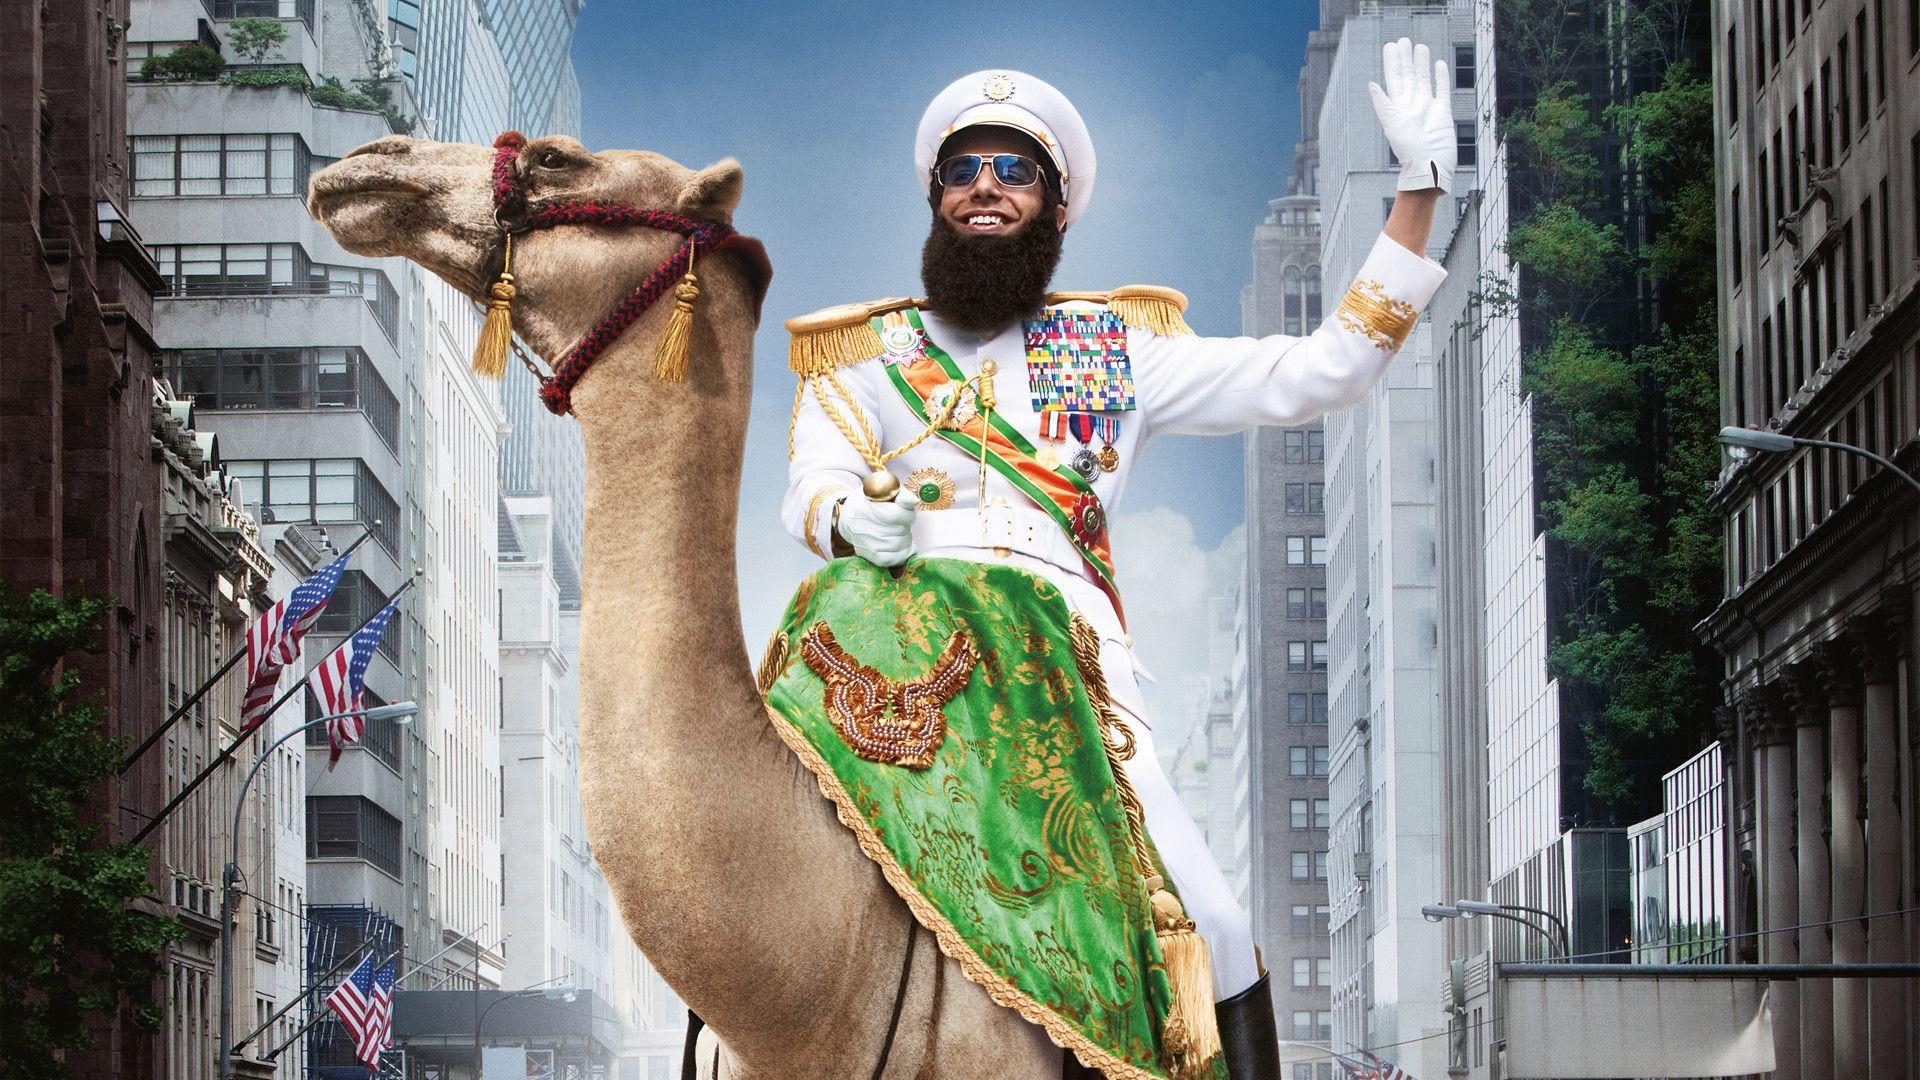 The Dictator Full HD Wallpaper and Background Imagex1080